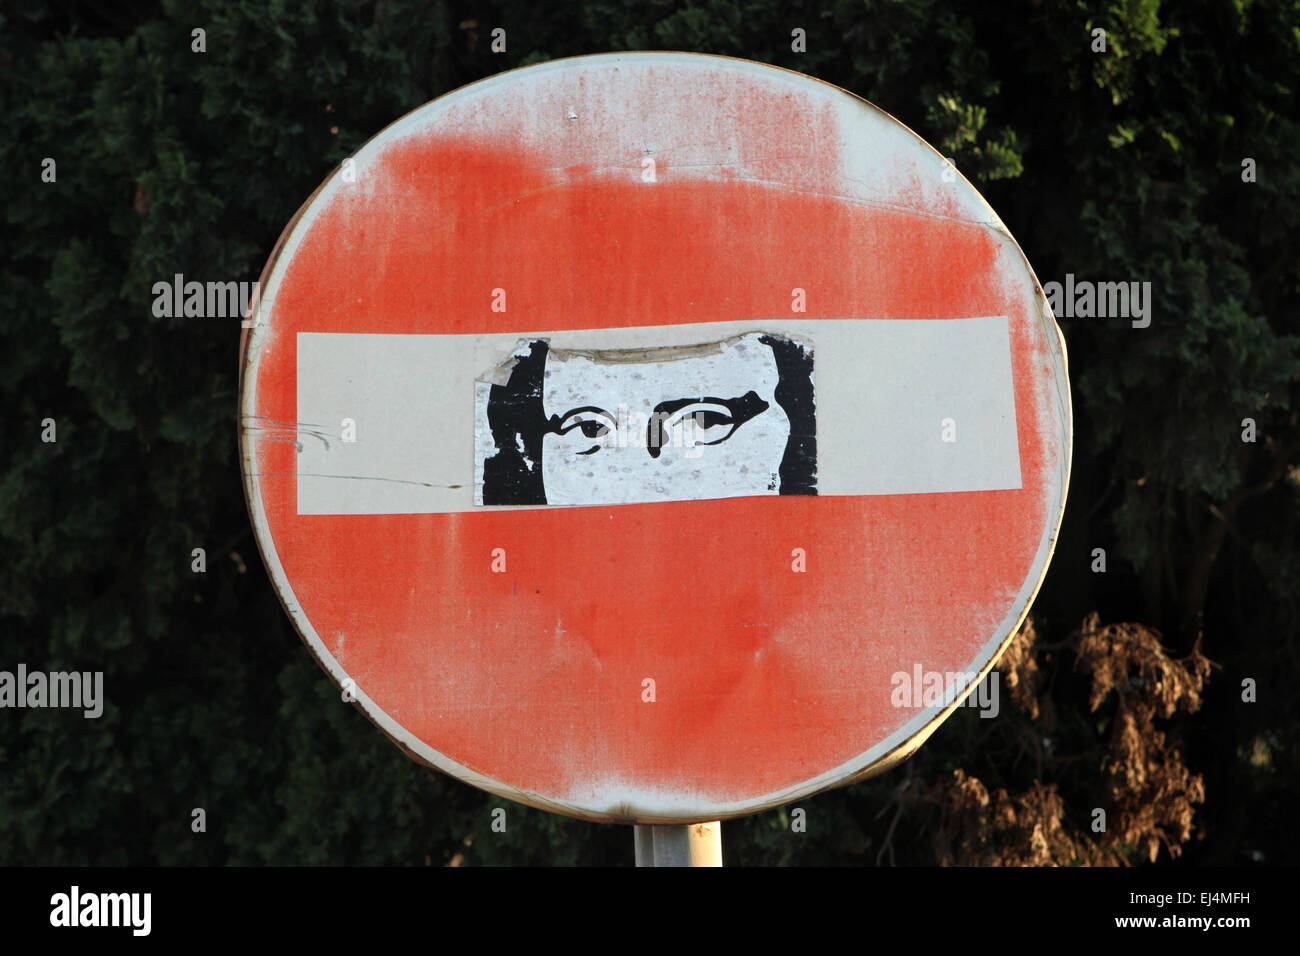 Mona Lisa by Leonardo da Vinci depicted in the No Entry traffic sign in Rome, Italy. Stock Photo